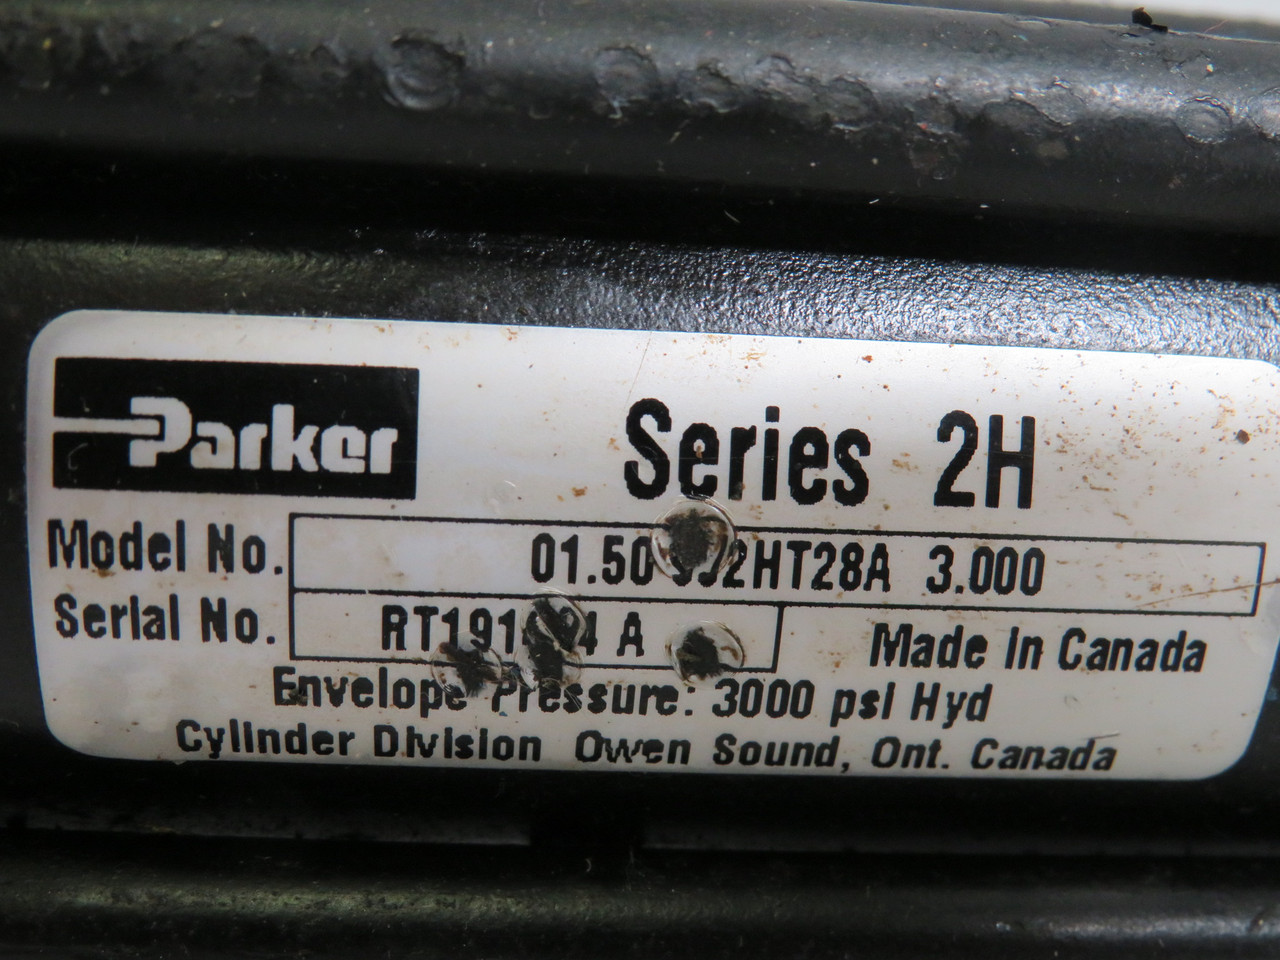 Parker 01.50JJ2HT28A-3.000 Hydraulic Cylinder 1.5" Bore 3" Stroke USED